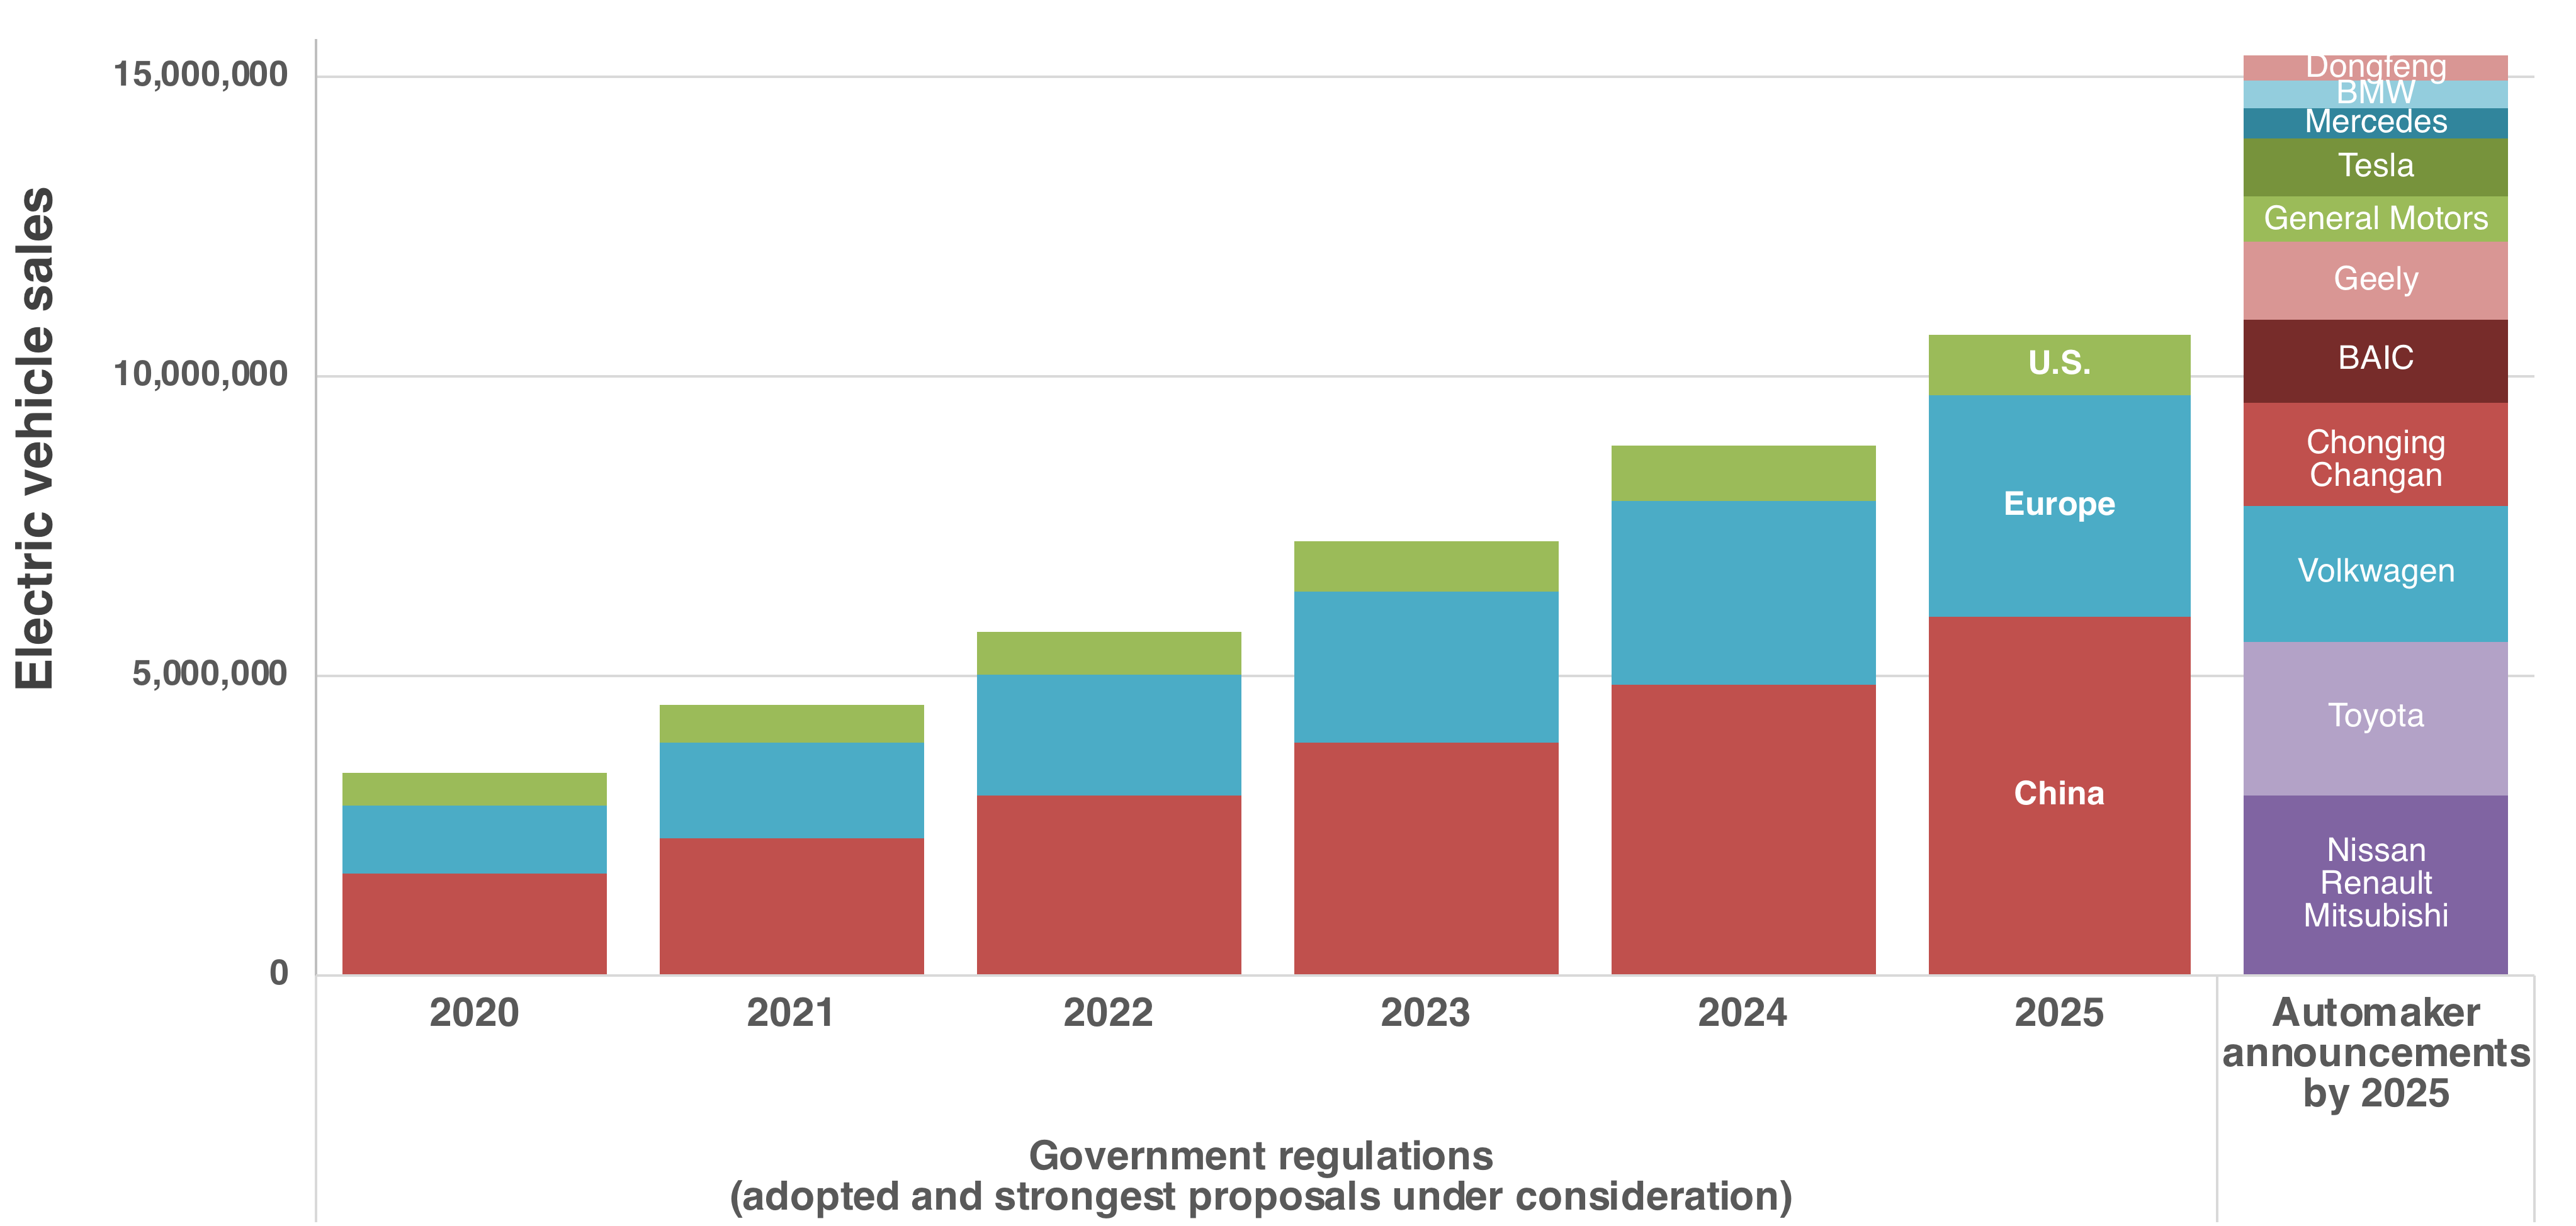 Electric vehicles required by 2020-2025 policy and announced auto industry 2025 deployment